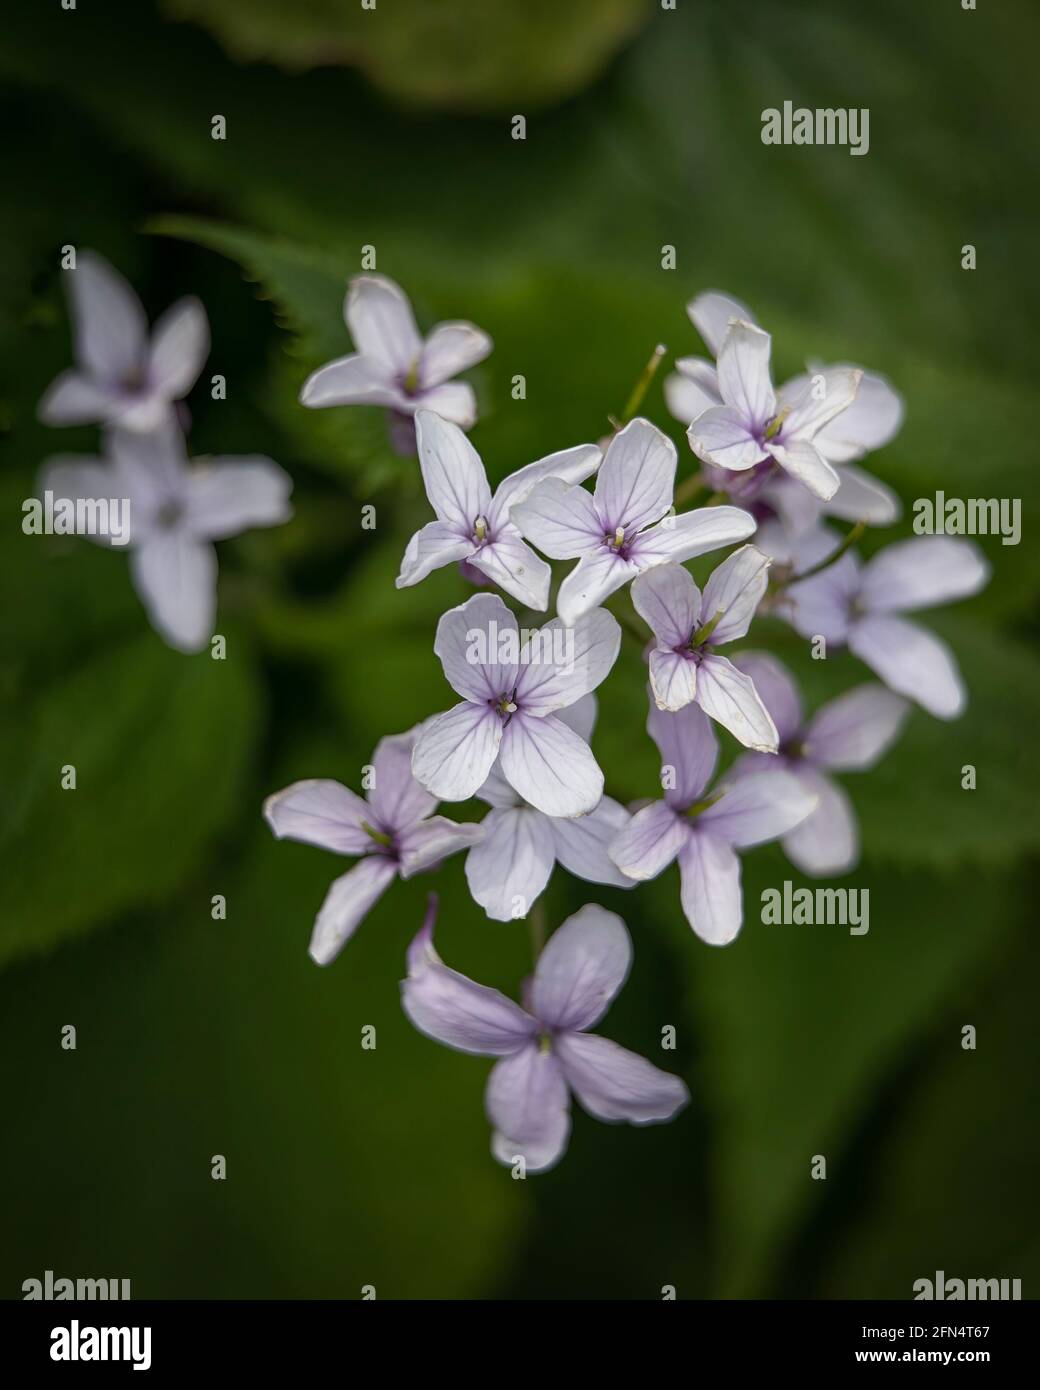 Closeup of flowers of perennial honesty, Lunaria rediviva, in the spring against a dark background Stock Photo